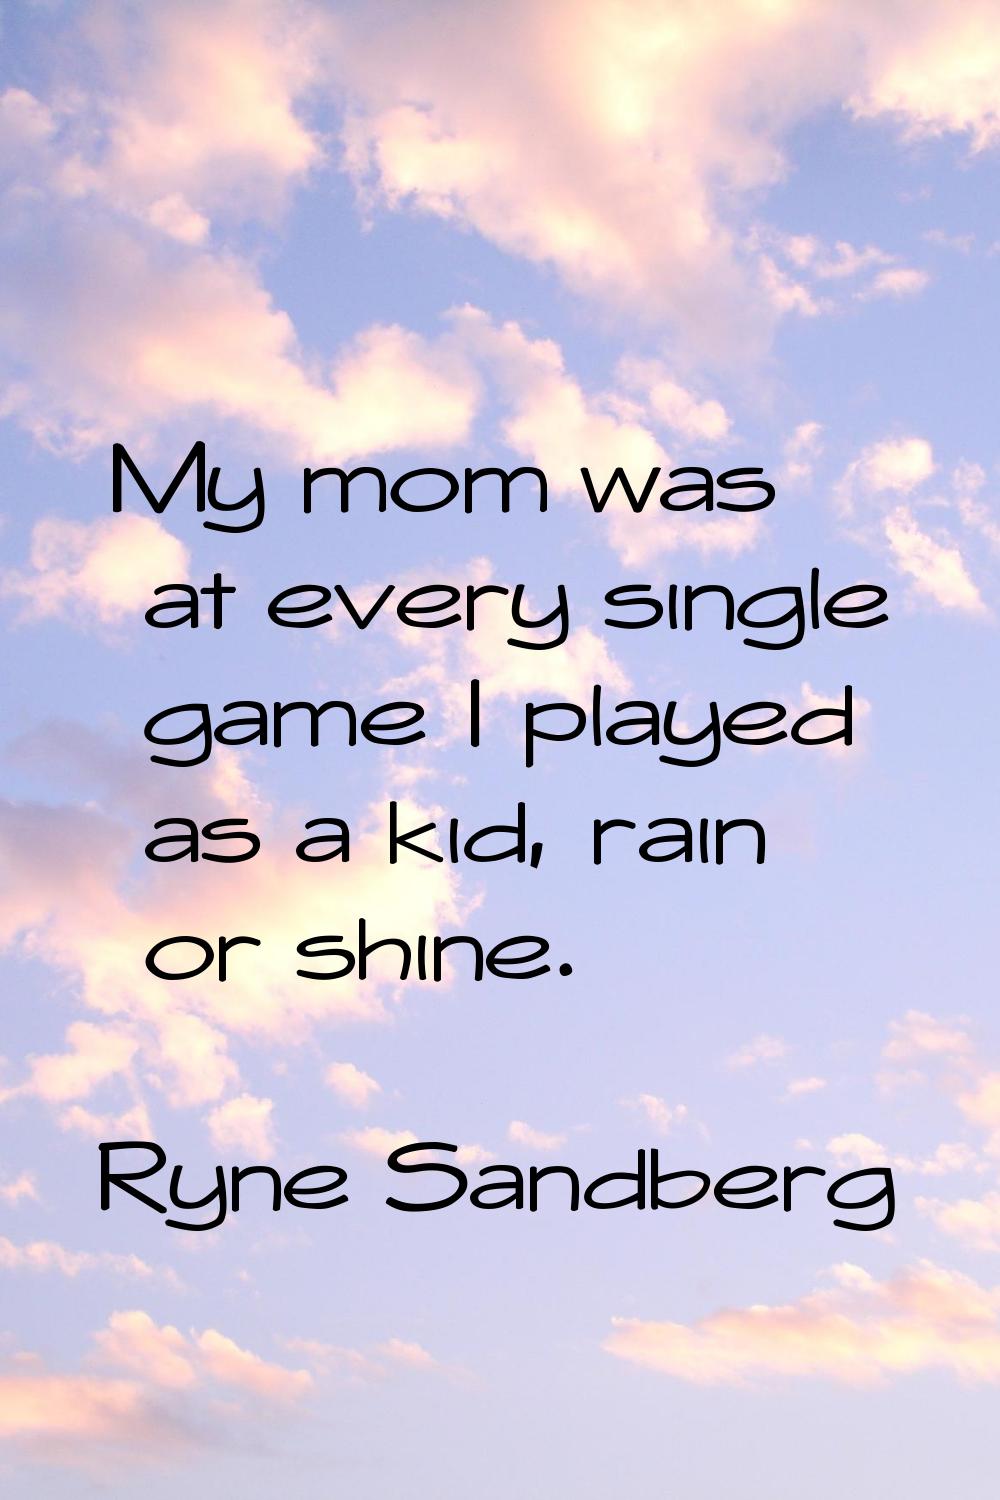 My mom was at every single game I played as a kid, rain or shine.